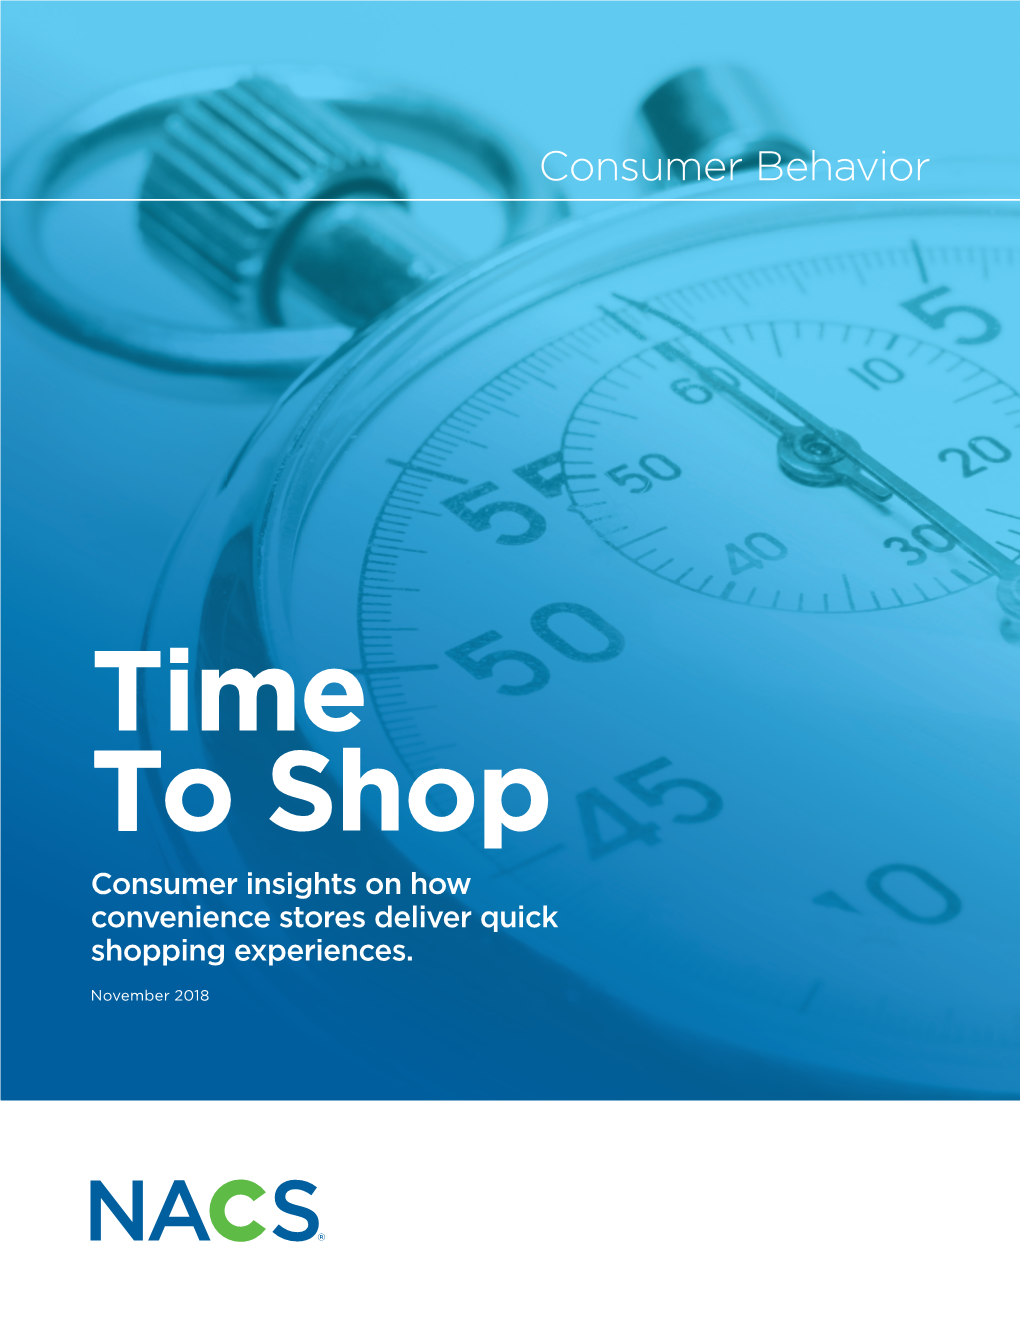 Time to Shop Consumer Insights on How Convenience Stores Deliver Quick Shopping Experiences